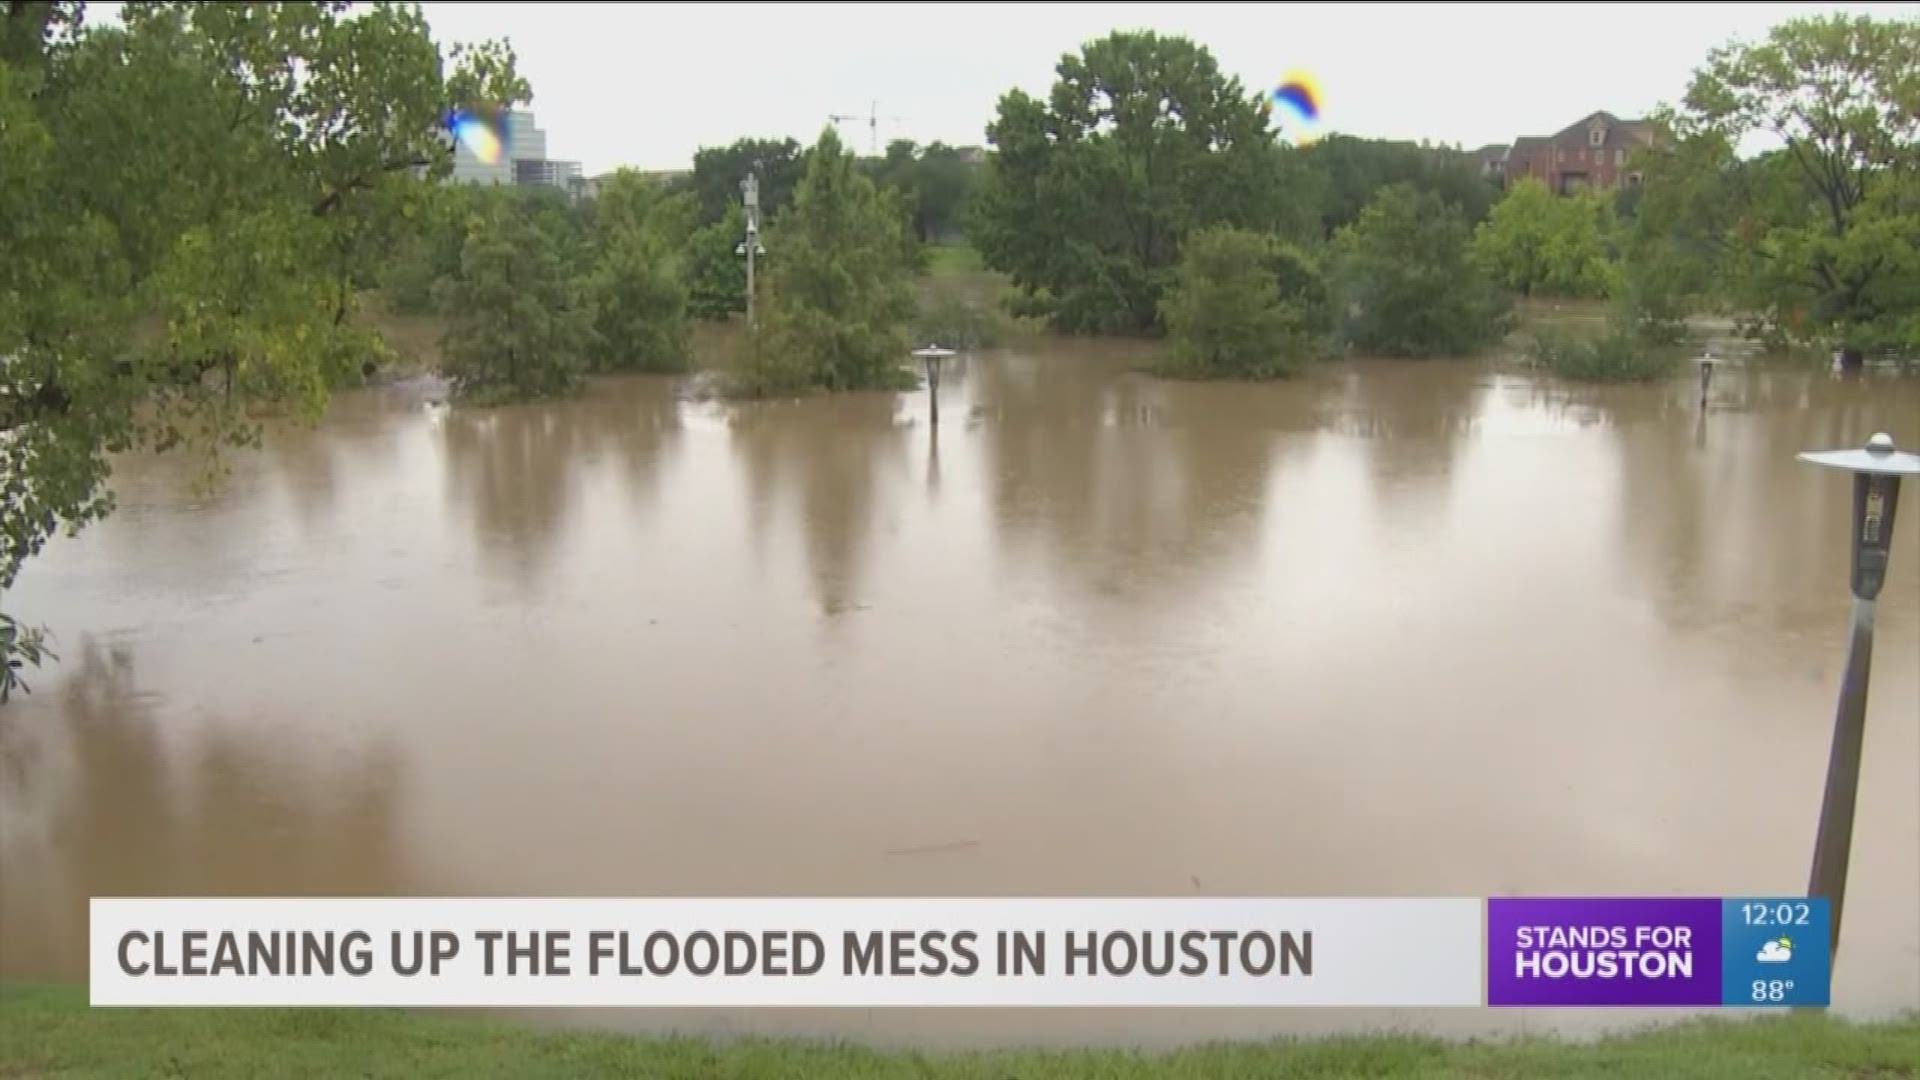 Cleanup is underway throughout Houston after thunderstorms flooded much of the city on Wednesday. 